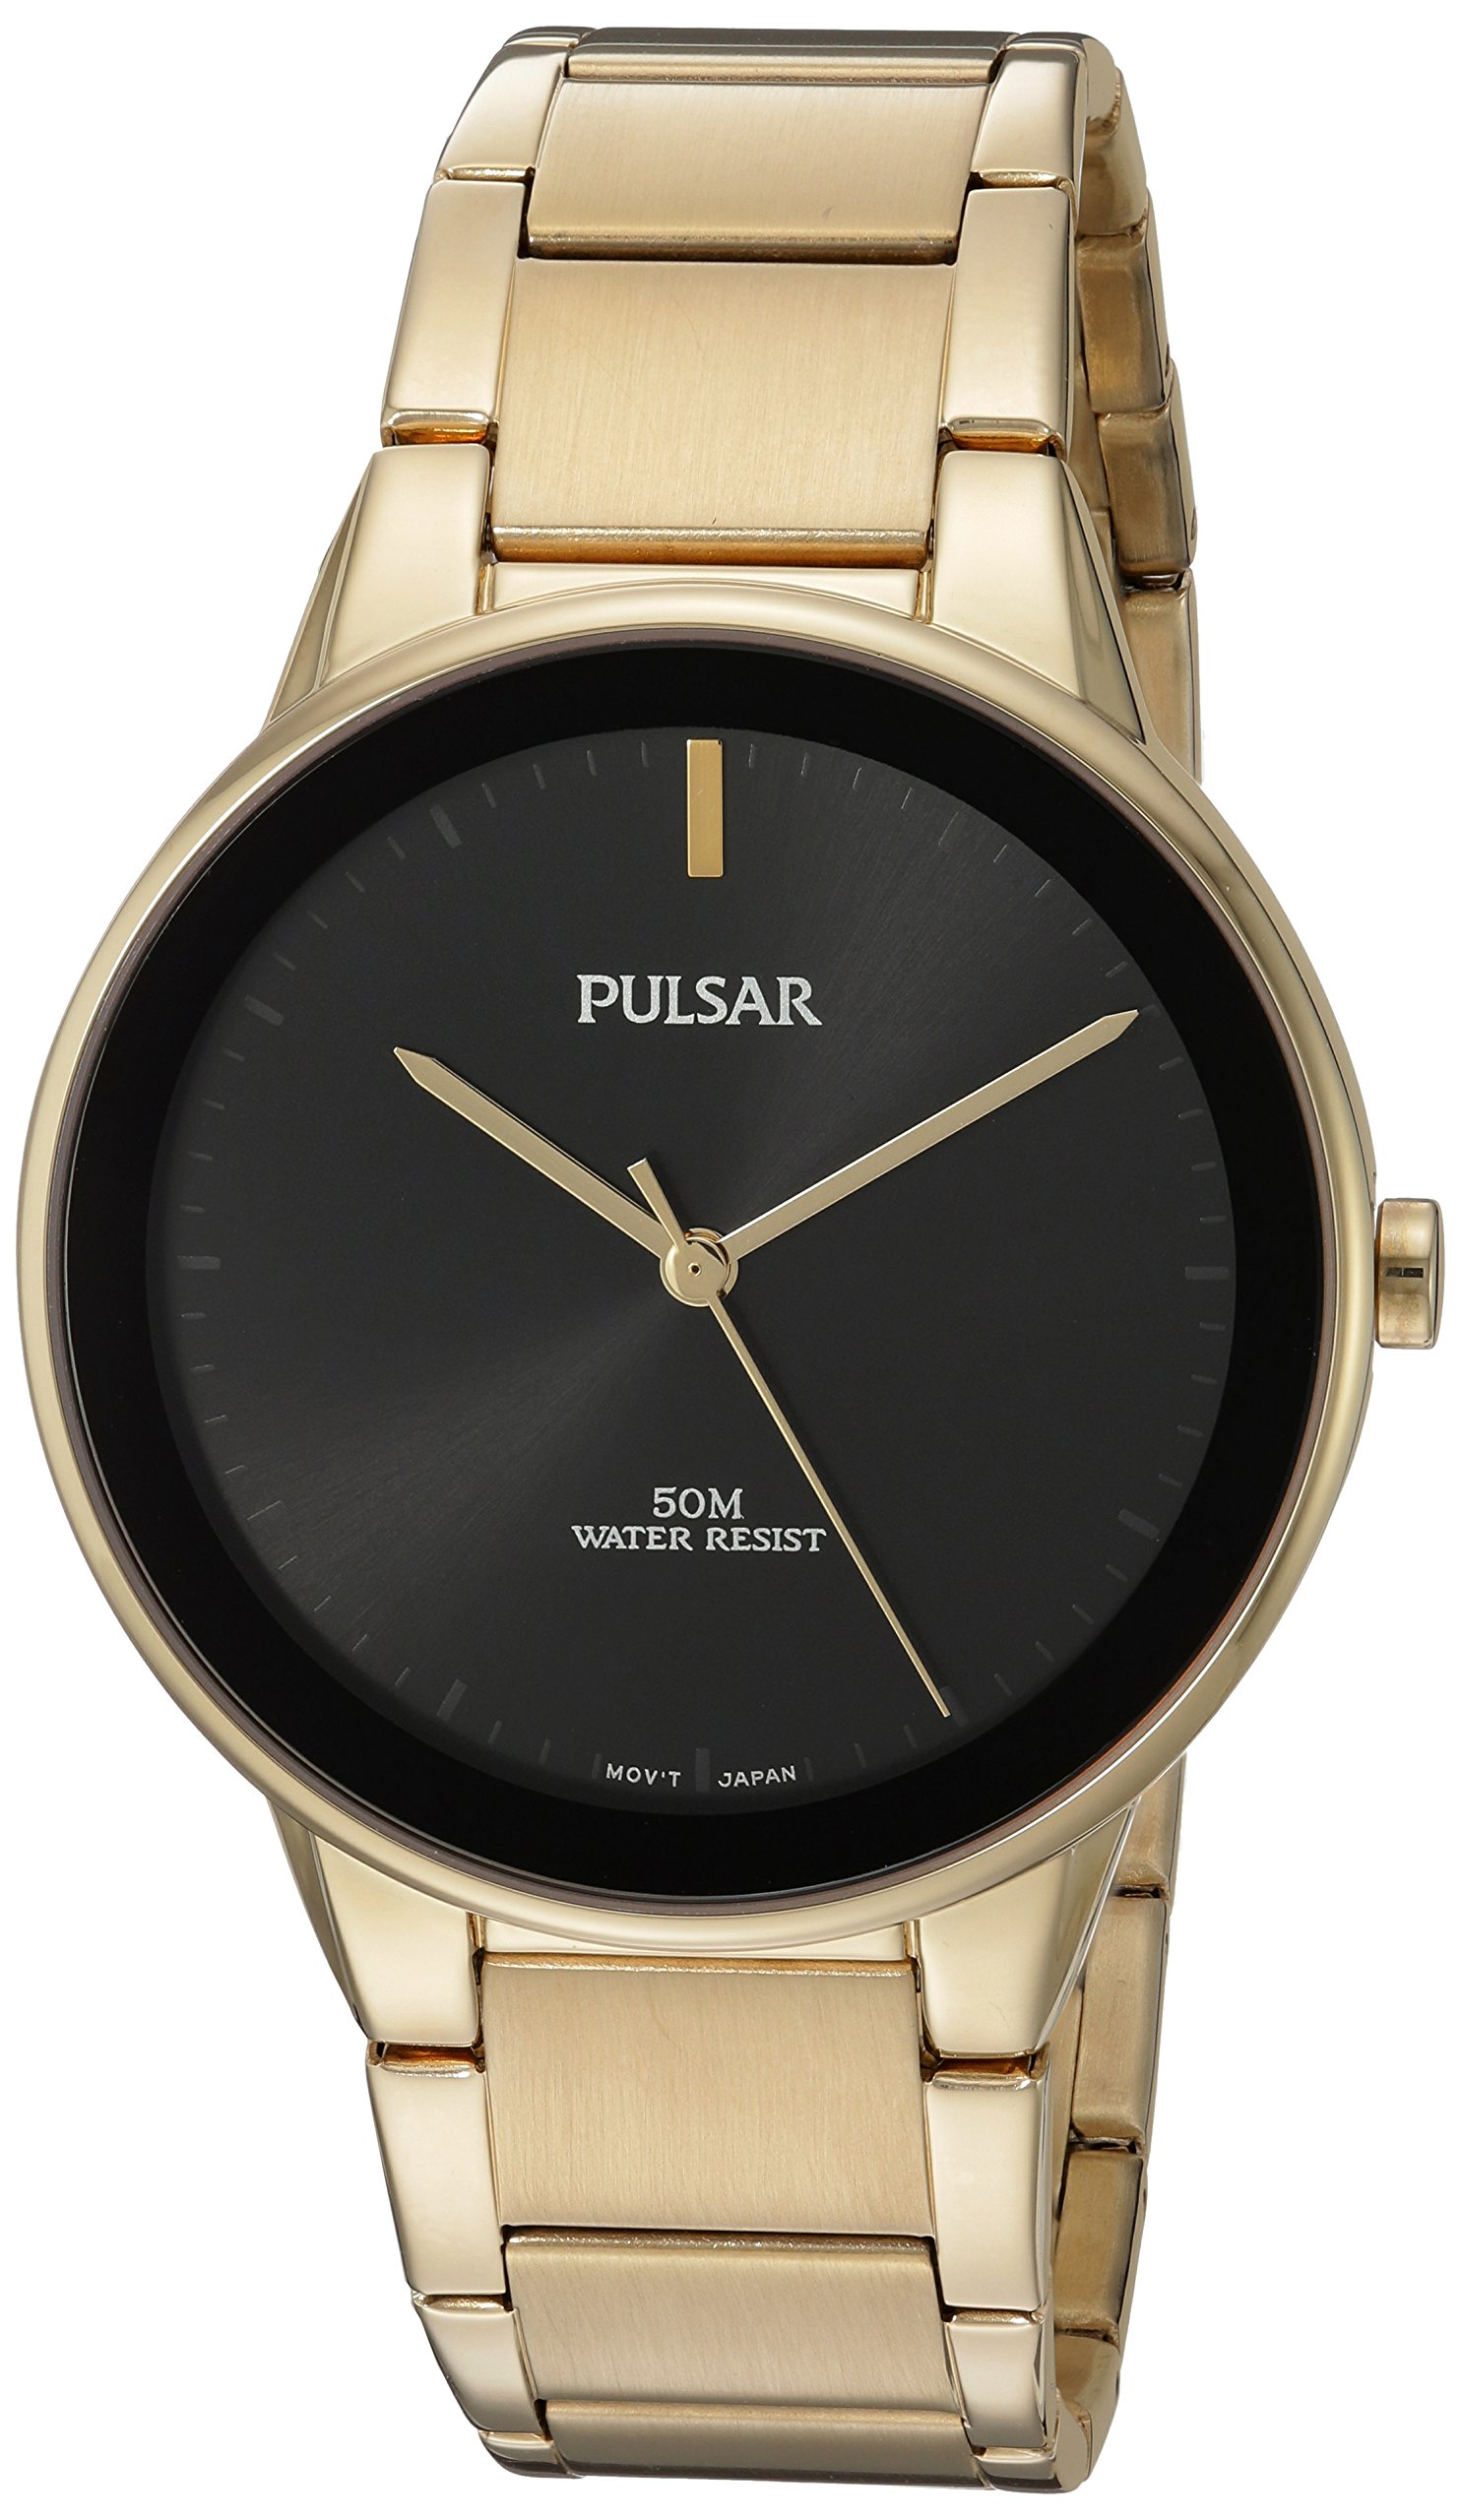 Pulsar Men's Quartz Brass and Stainless Steel Dress Watch, Color:Gold-Toned (Model: PG2046)